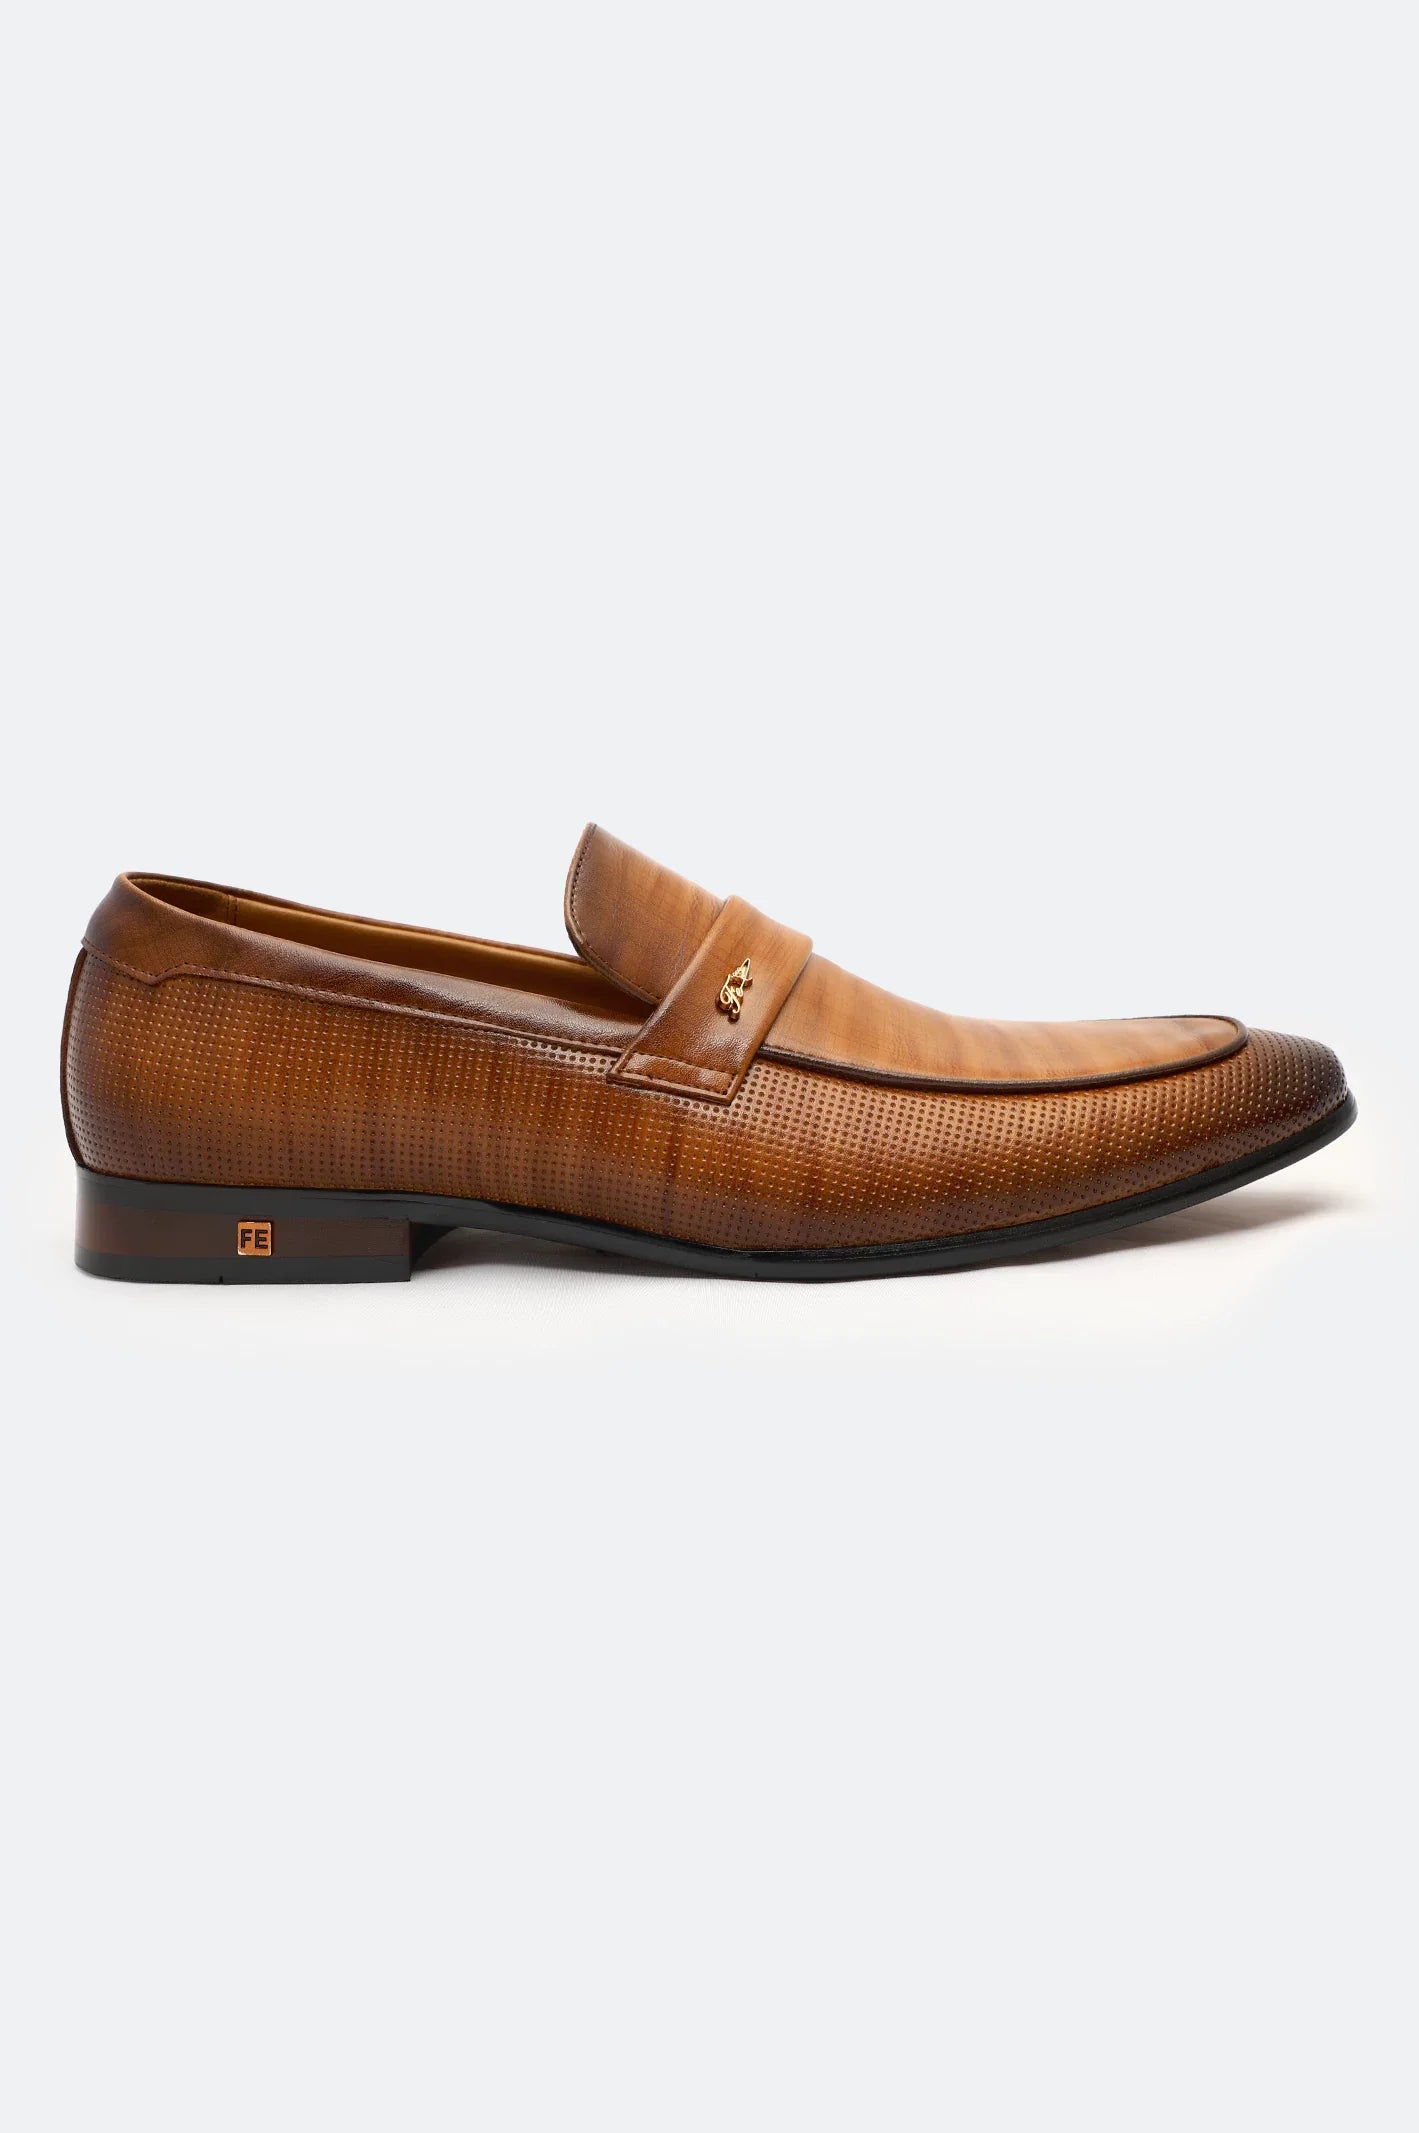 Brown Formal Mocassins Shoes Premium Shoes From French Emporio By Diners